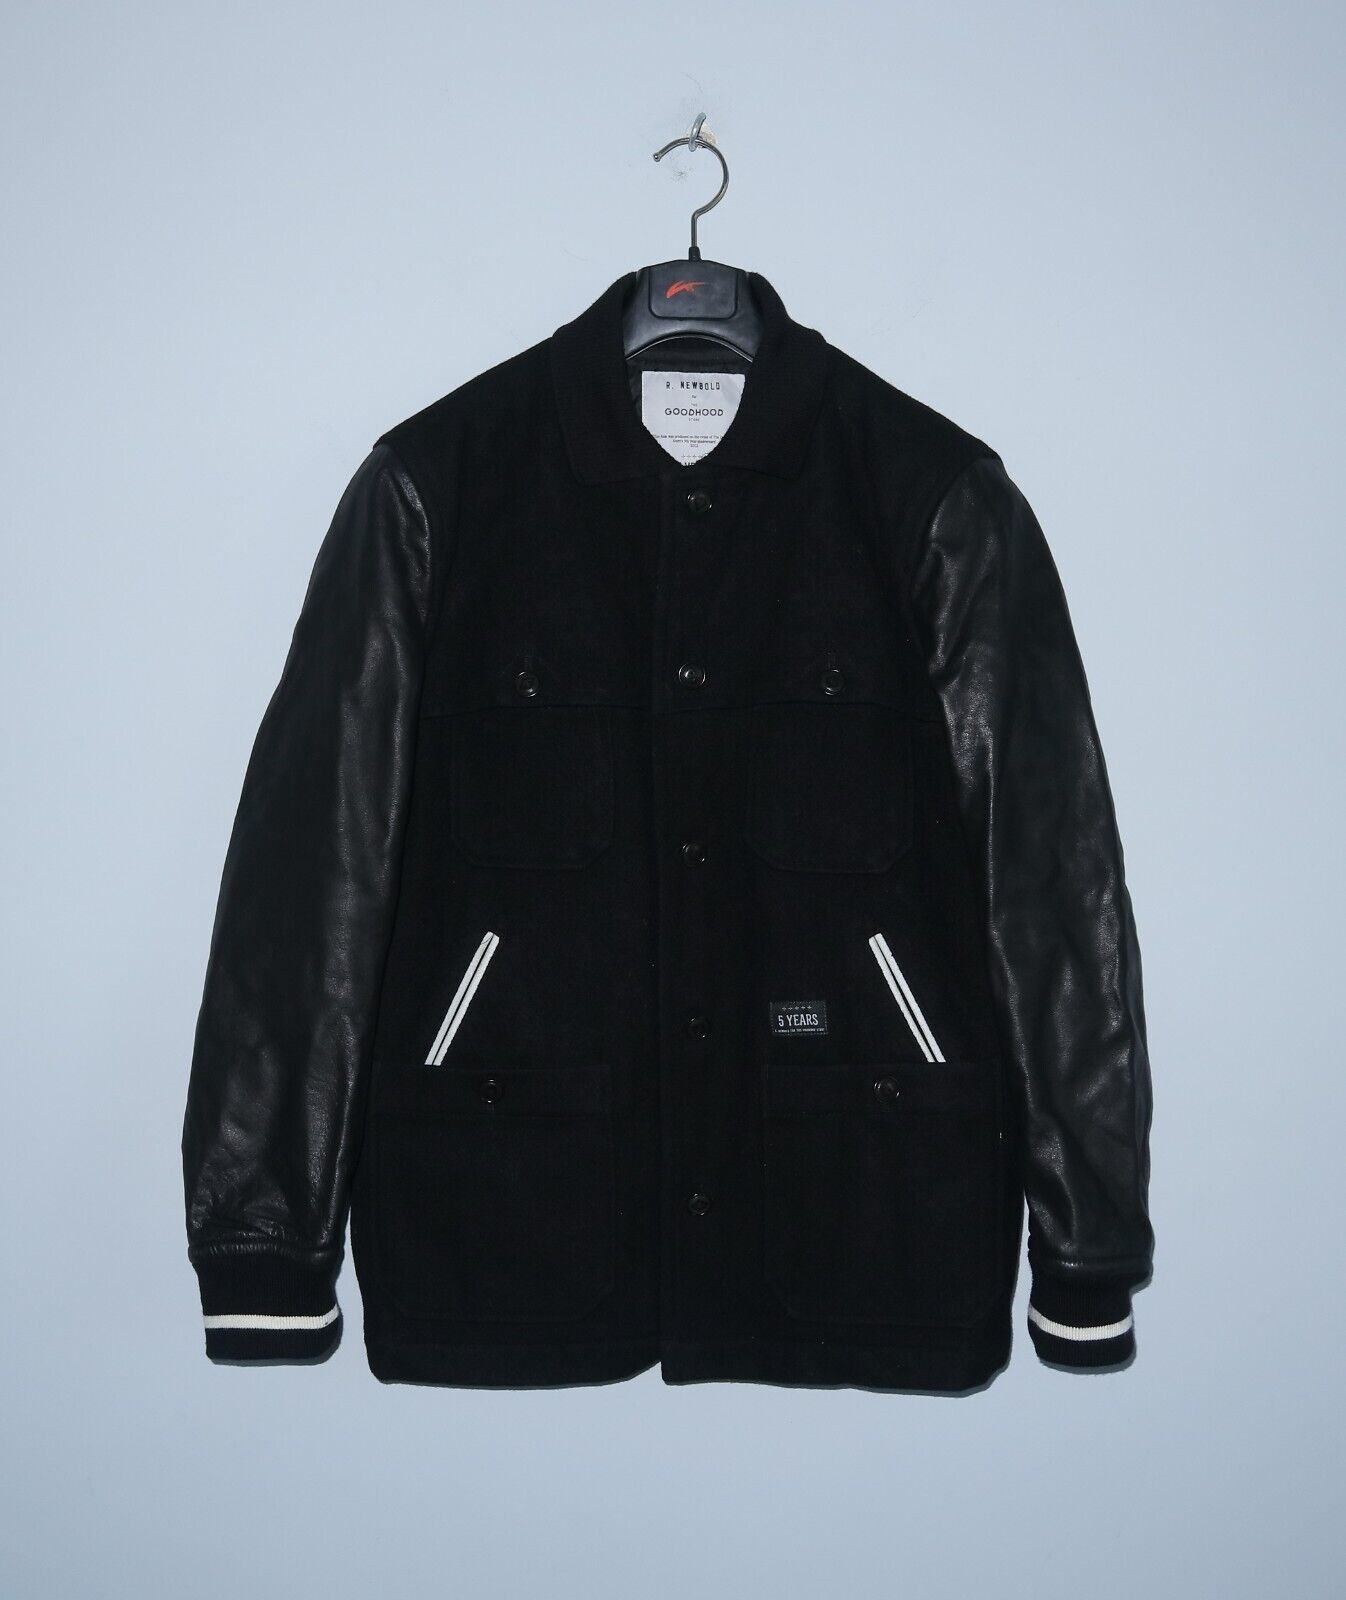 R.NEWBOLD x GOODHOOD Mens 5Years Anniversary Collection Bomber Jacket Size M